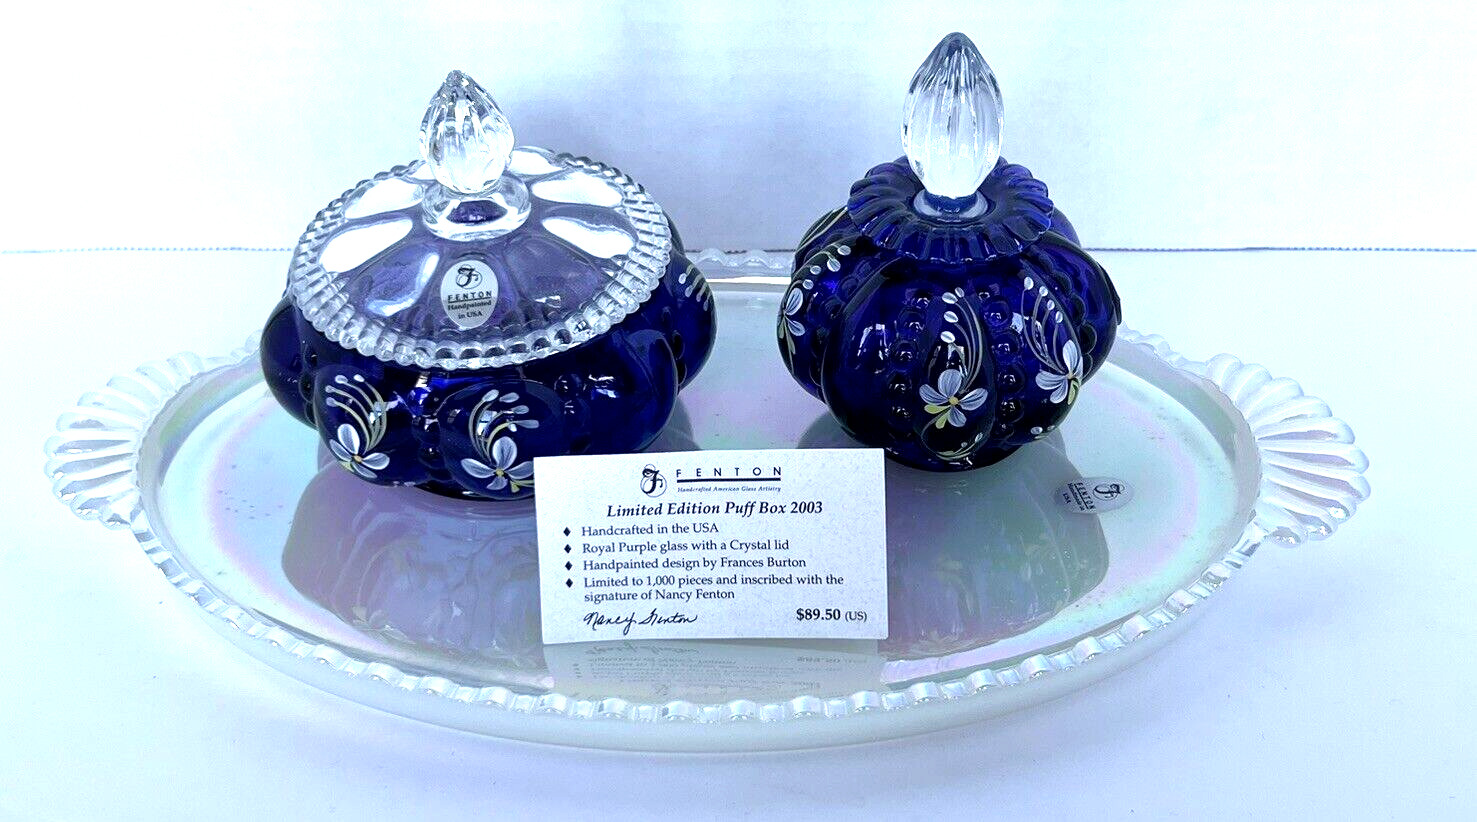 Fenton Vanity Set Royal Purple Beaded Melon Floral Hand Painted Limited Edition